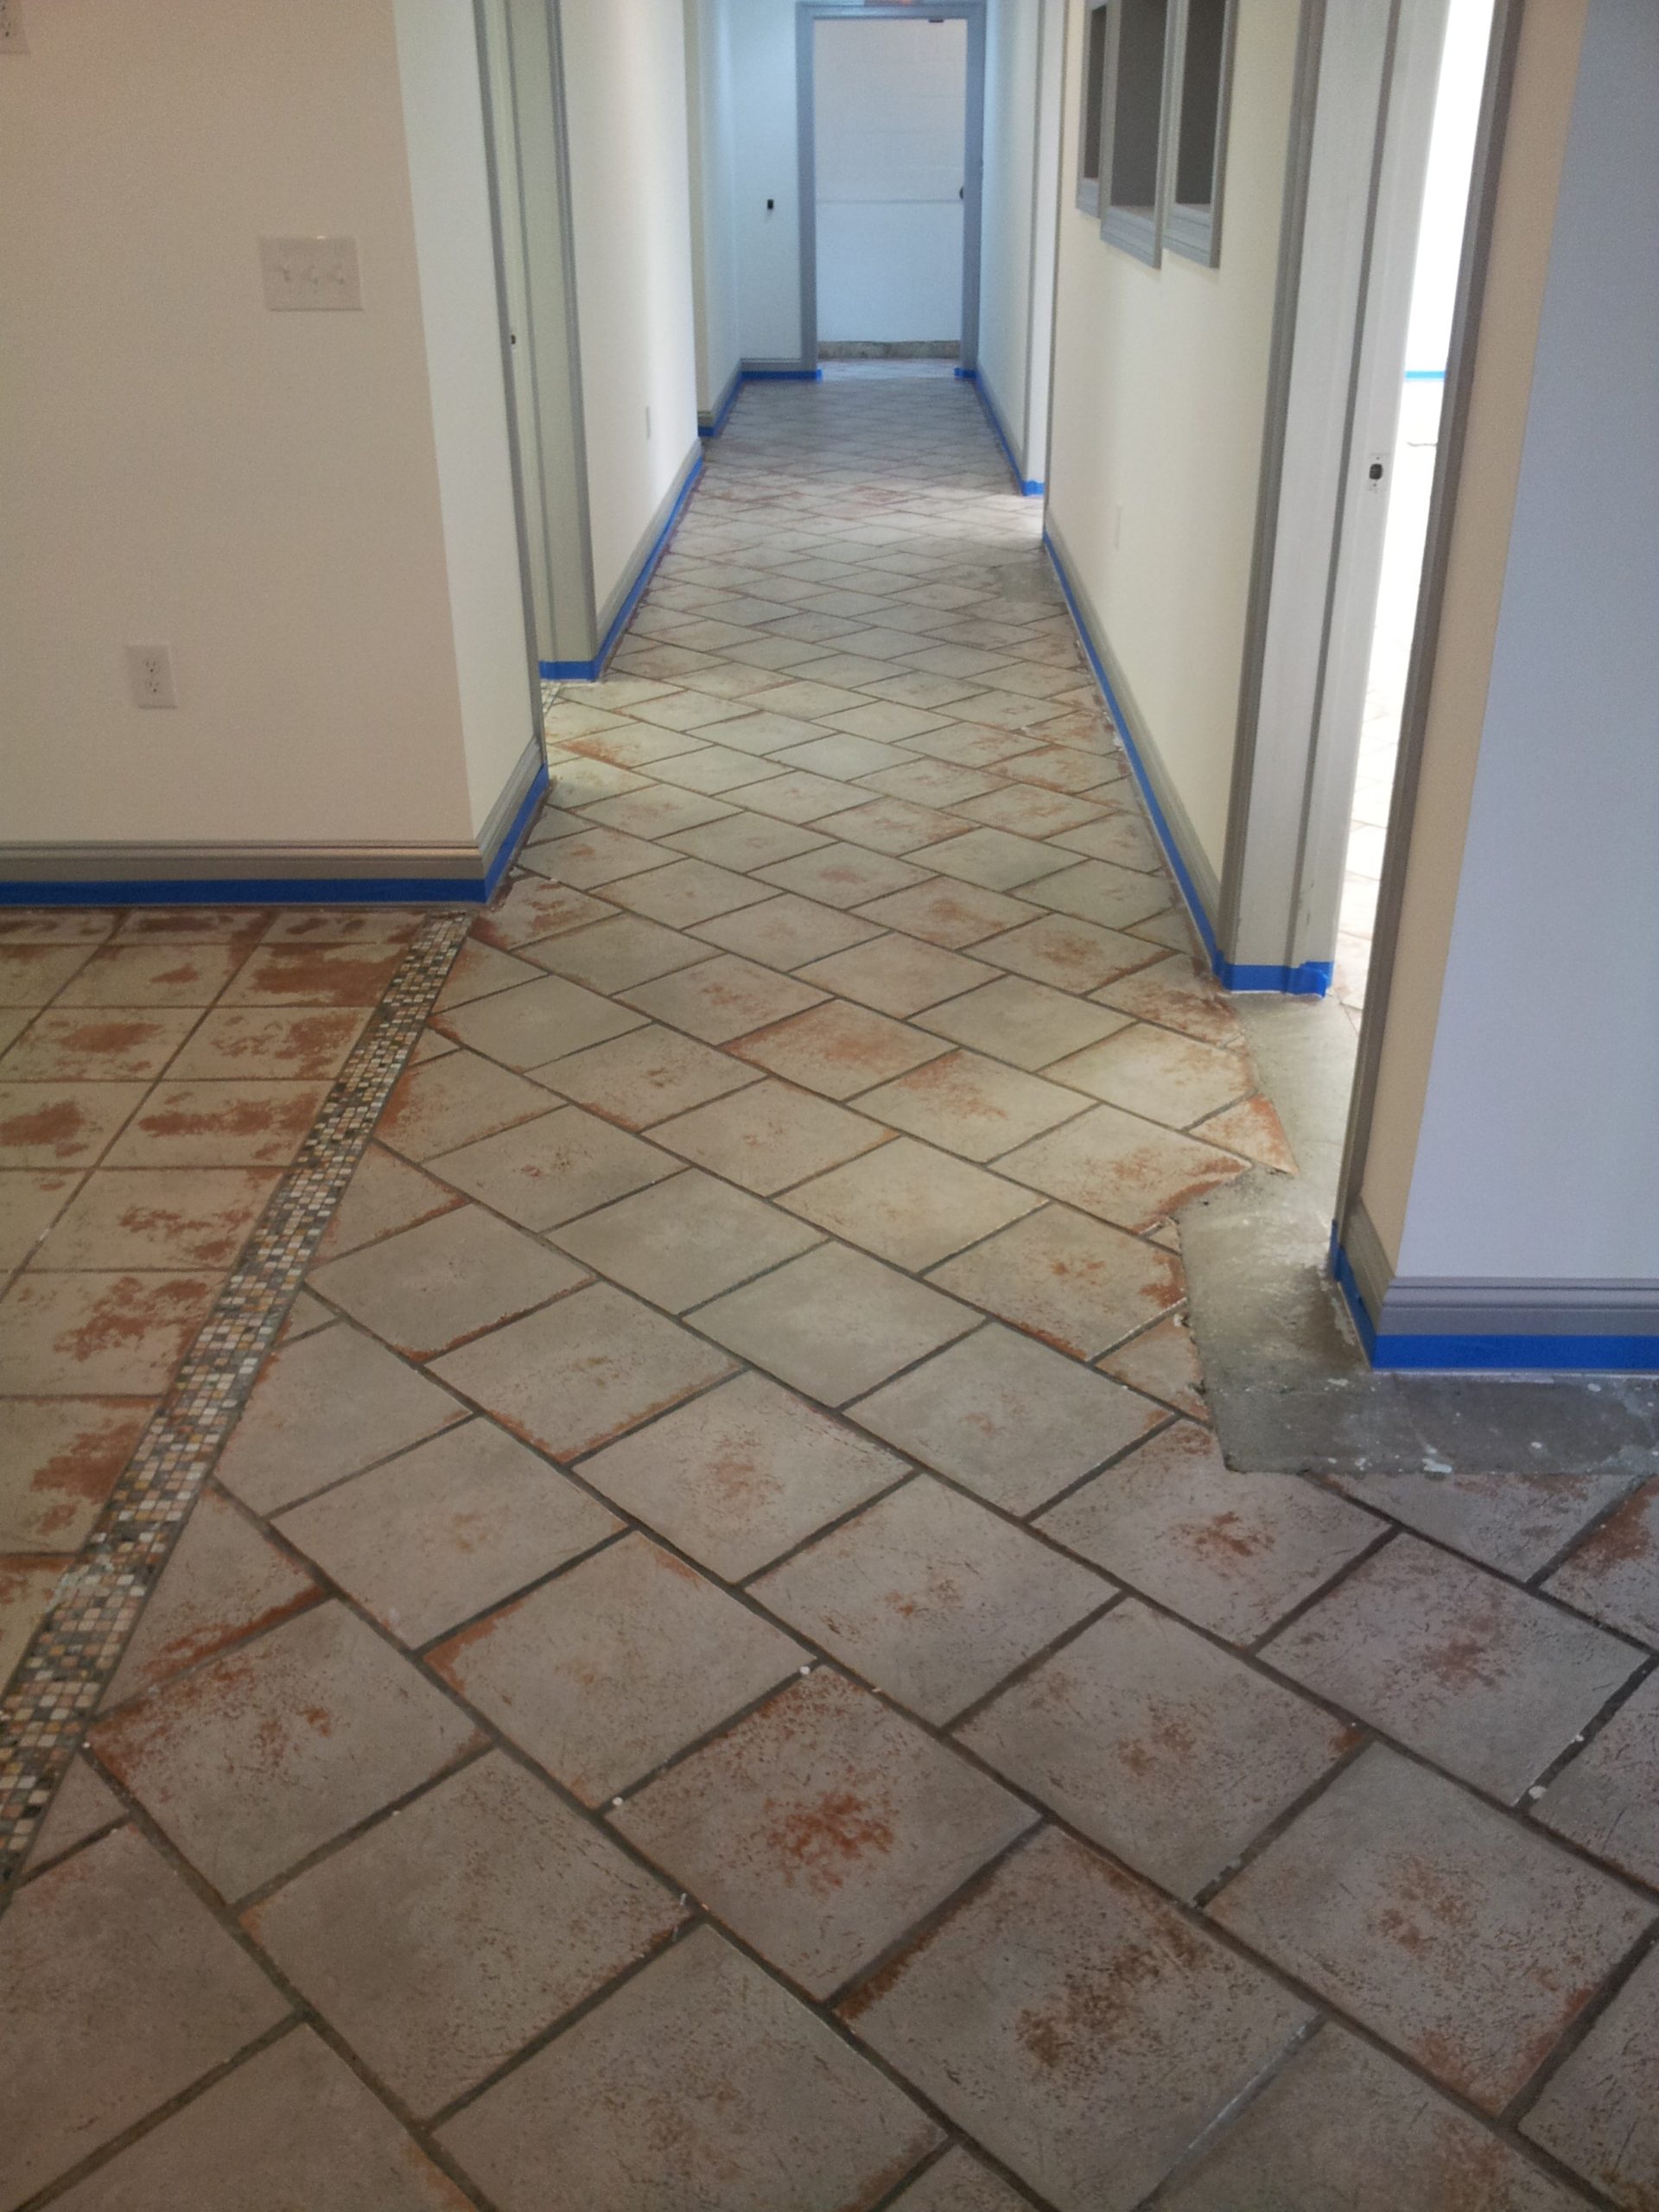 Existing Substrate Ceramic Tile Poured cement flooring at Cressi showroom in Saddle Brook NJ | Duraamen Engineered Products Inc